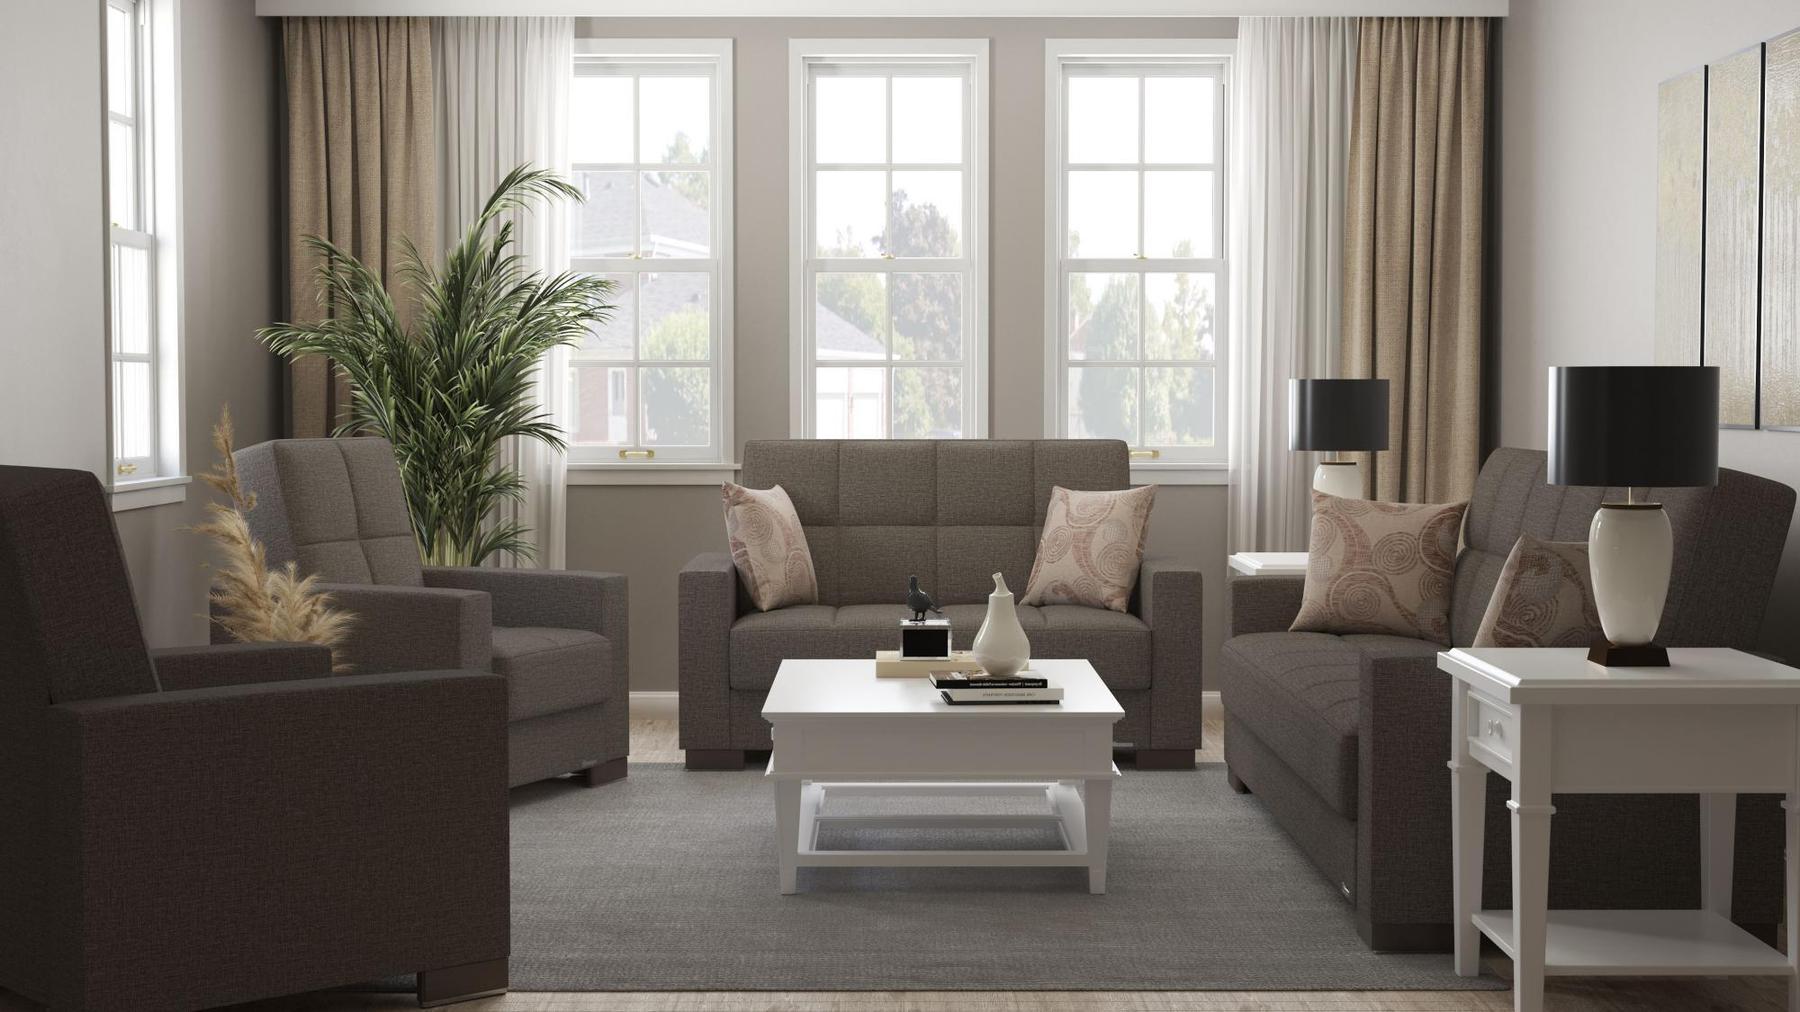 Modern design, Tannin Brown , Chenille upholstered convertible sleeper Sofabed with underseat storage from Voyage Track by Ottomanson in living room lifestyle setting with the matching furniture set. This Sofabed measures 90 inches width by 36 inches depth by 41 inches height.